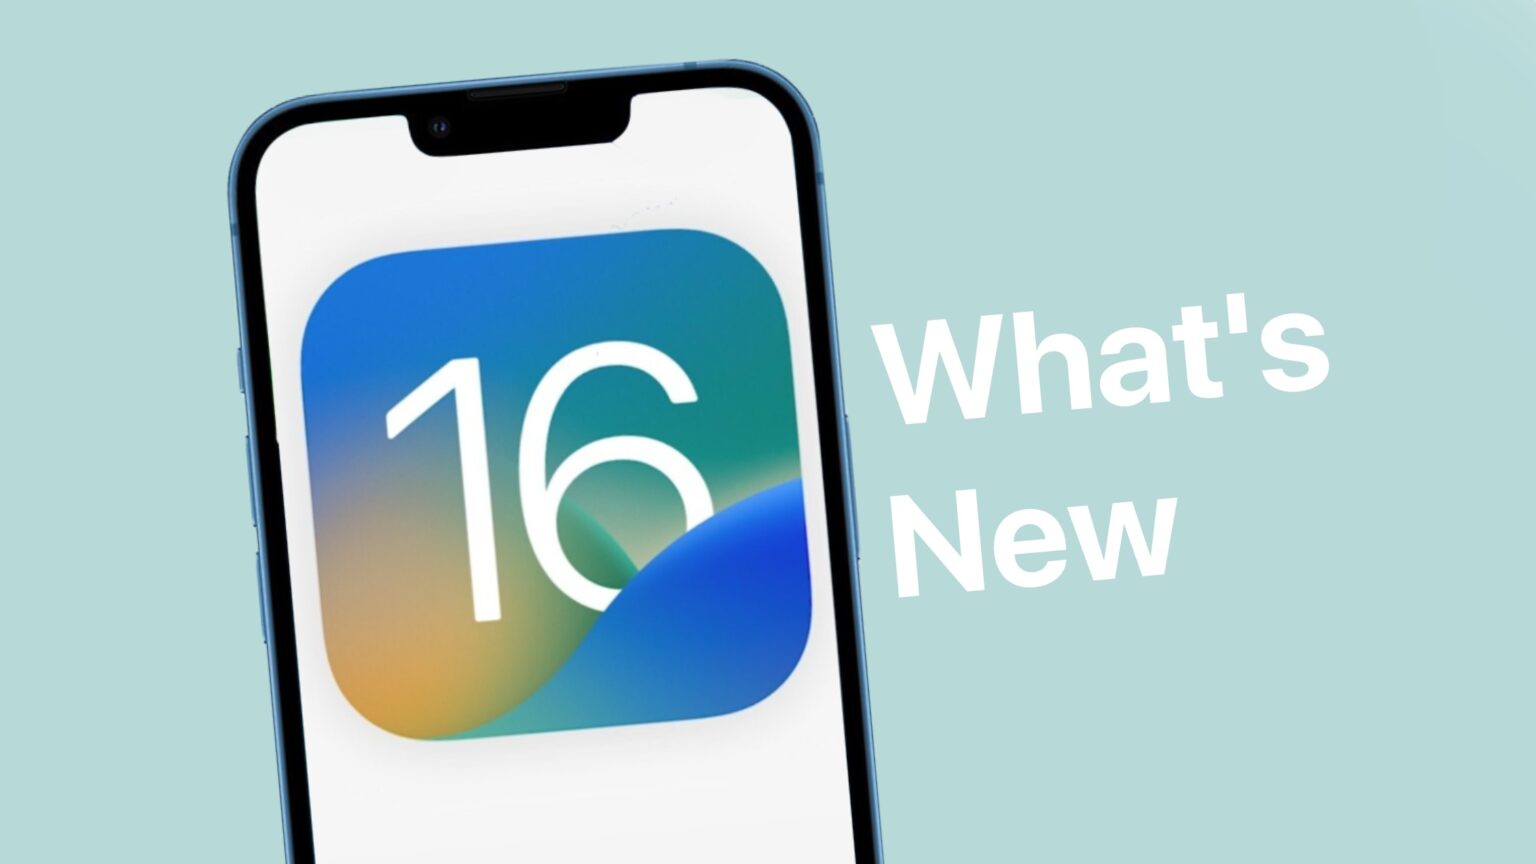 iOS 16 beta 4: All the new features and changes